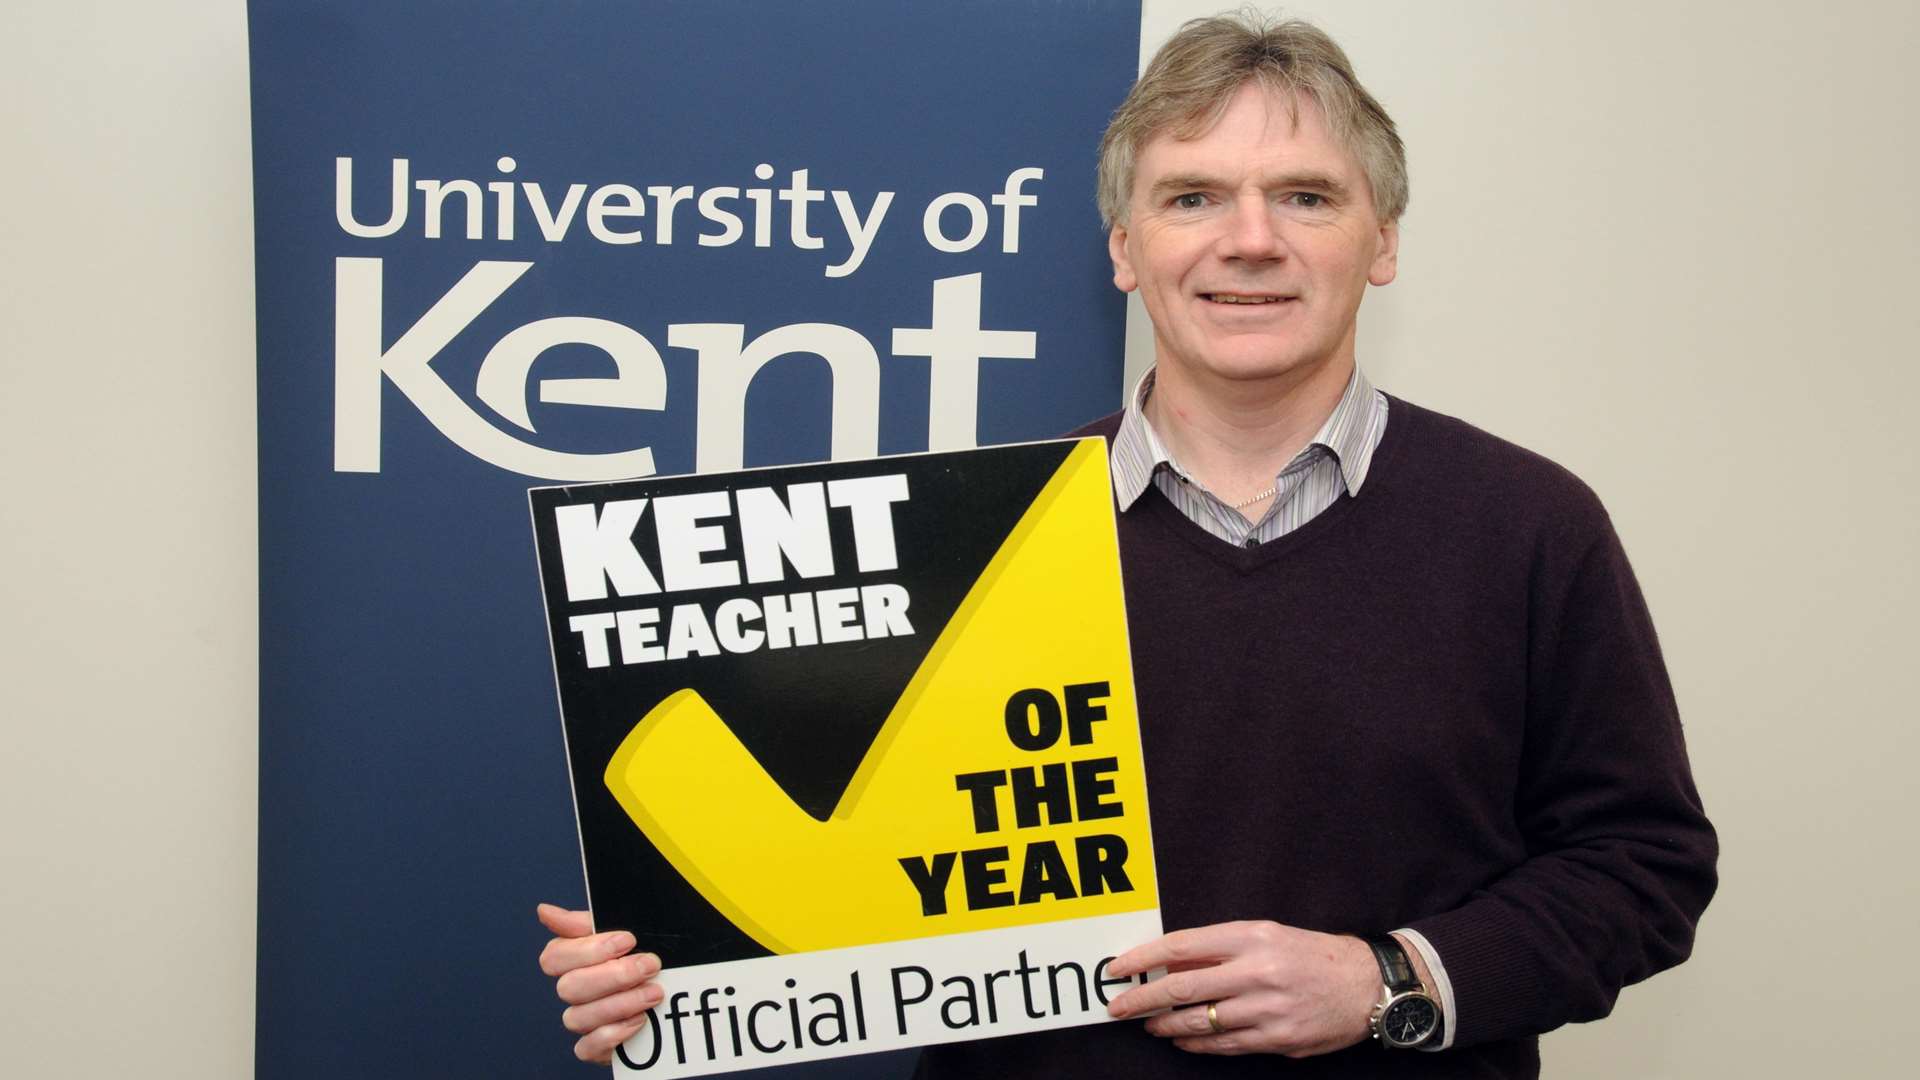 Prof Martin Warren of the University of Kent’s School of Biosciences is supporting the Kent Teacher of the Year Awards 2016.